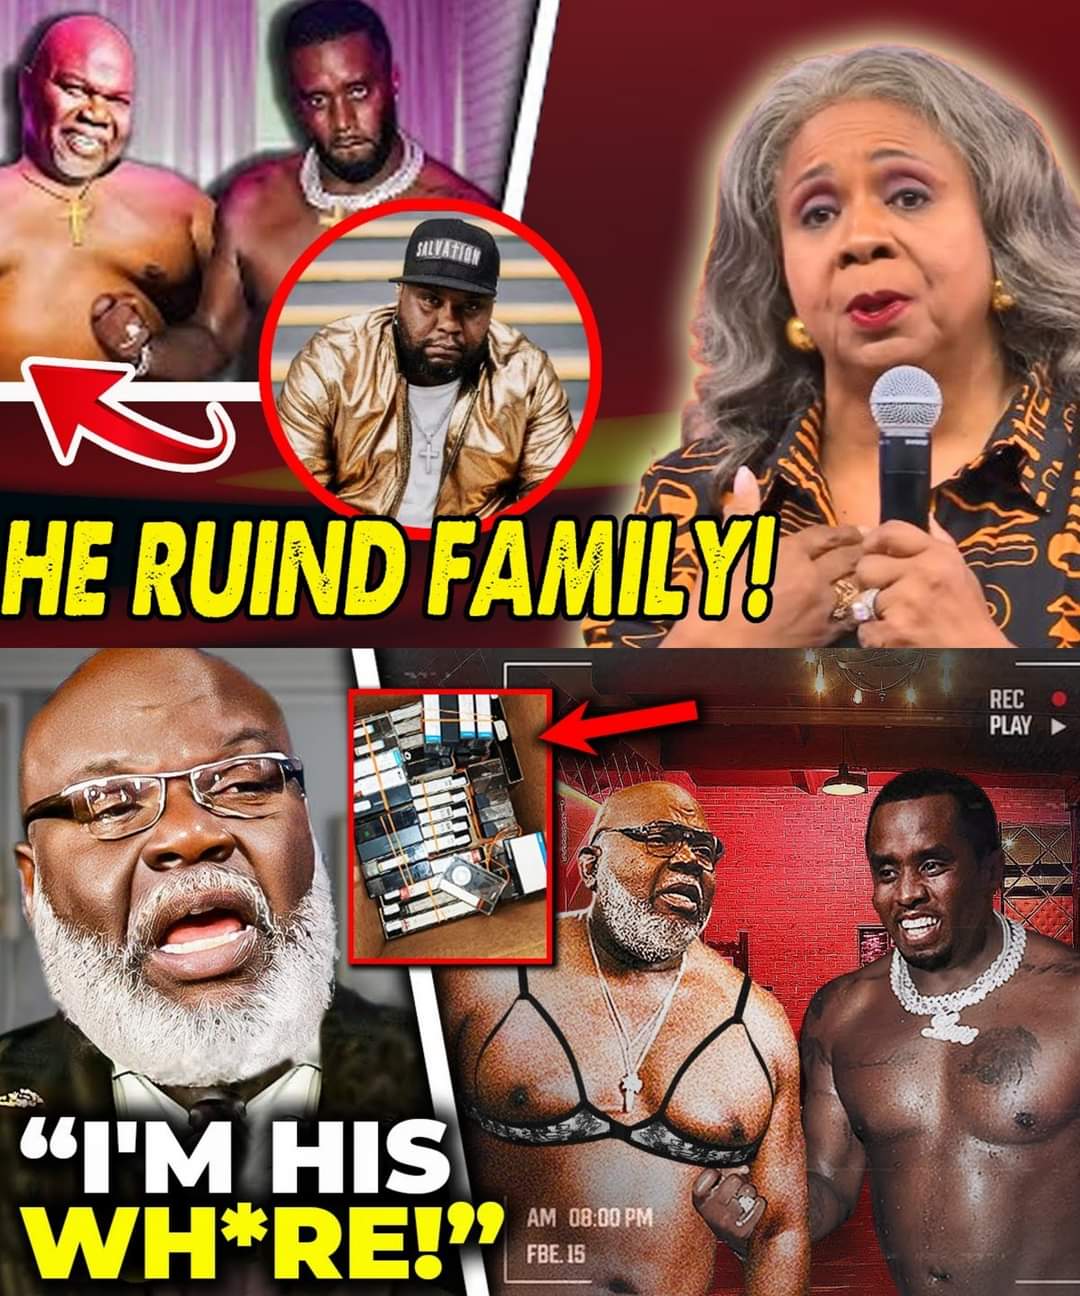 SH0CKING! TD Jakes Wife CONFIRMS The Rumors of TD Jakes and His Son, TD Jakes affair with Diddy